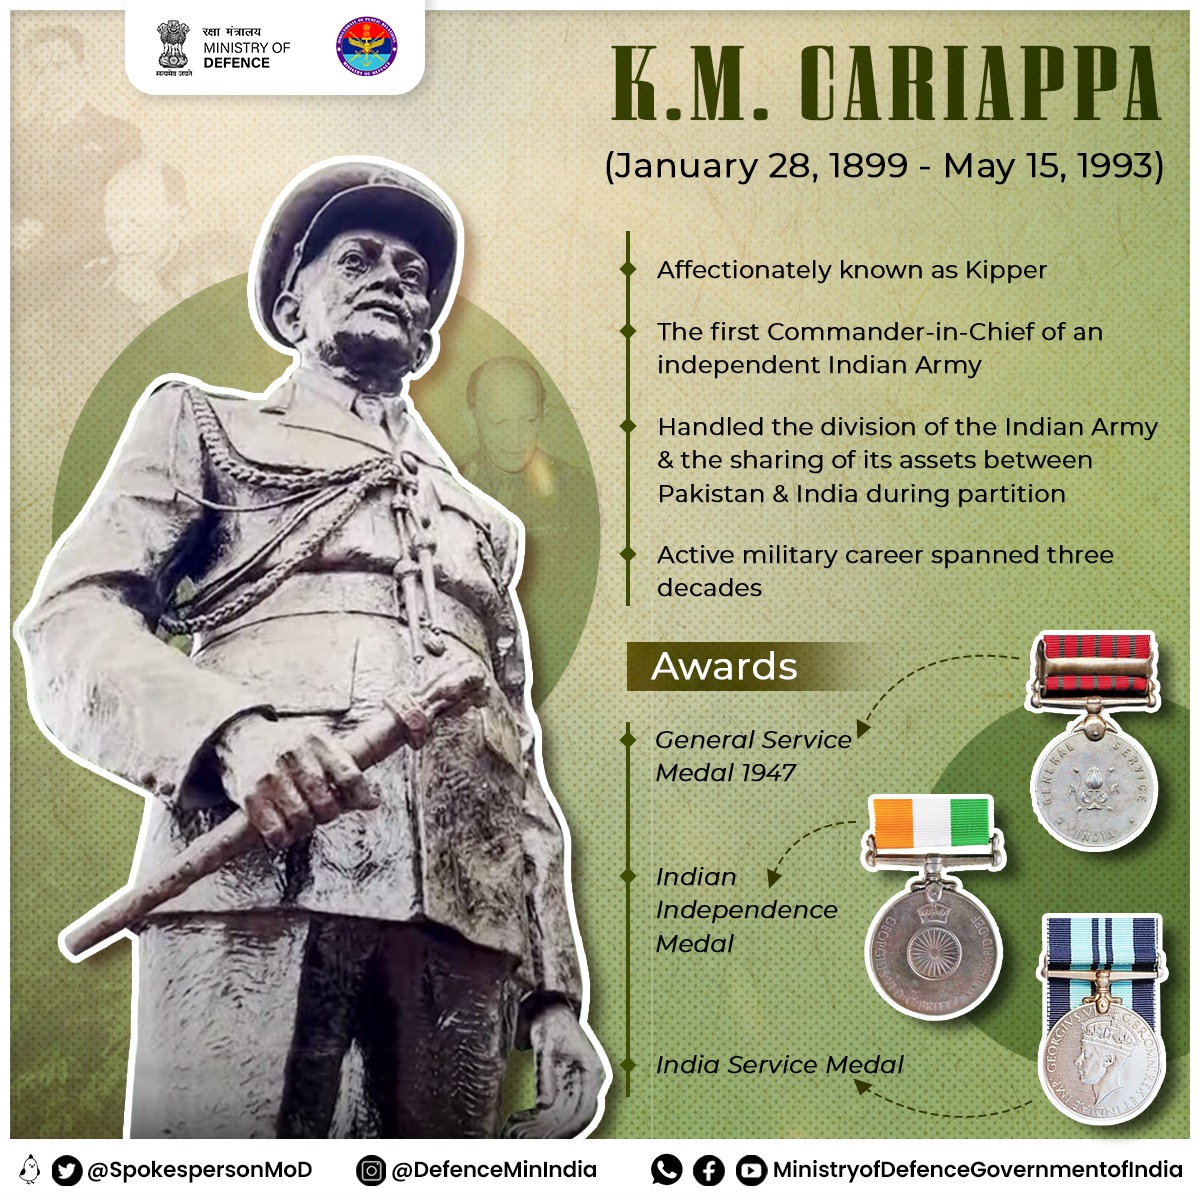 Remembering Field Marshal K.M. Cariappa, the first Commander-in-Chief of the Indian Army on his 31st death anniversary. During partition, he handled the division of the Indian Army & the sharing of its assets between Pakistan and India, in a most amicable, just, & orderly manner.